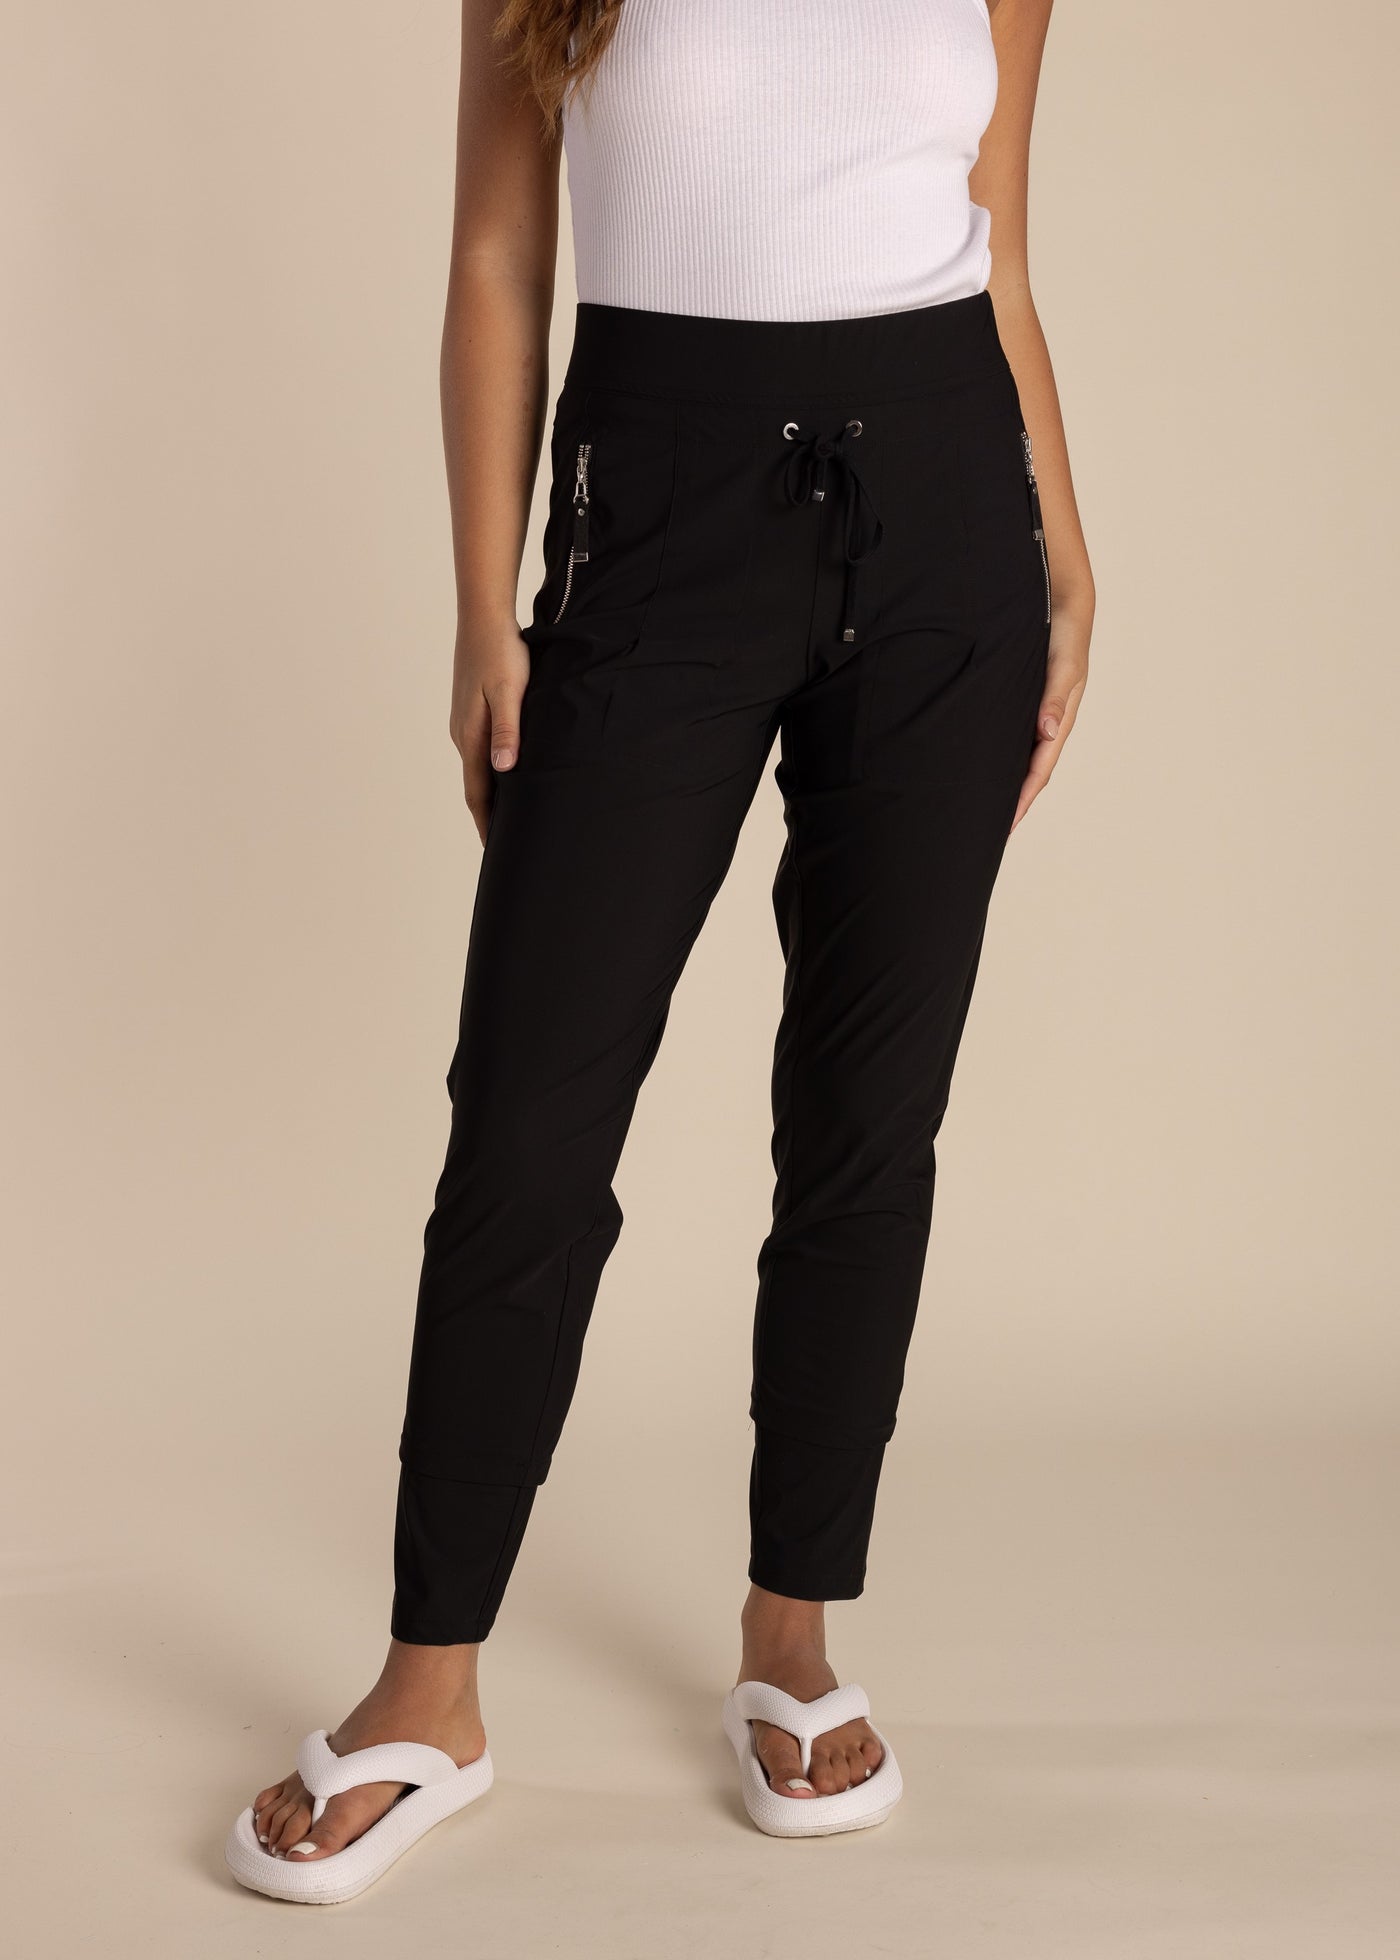 Two T's</p>Panelled Pant</p>(Black)